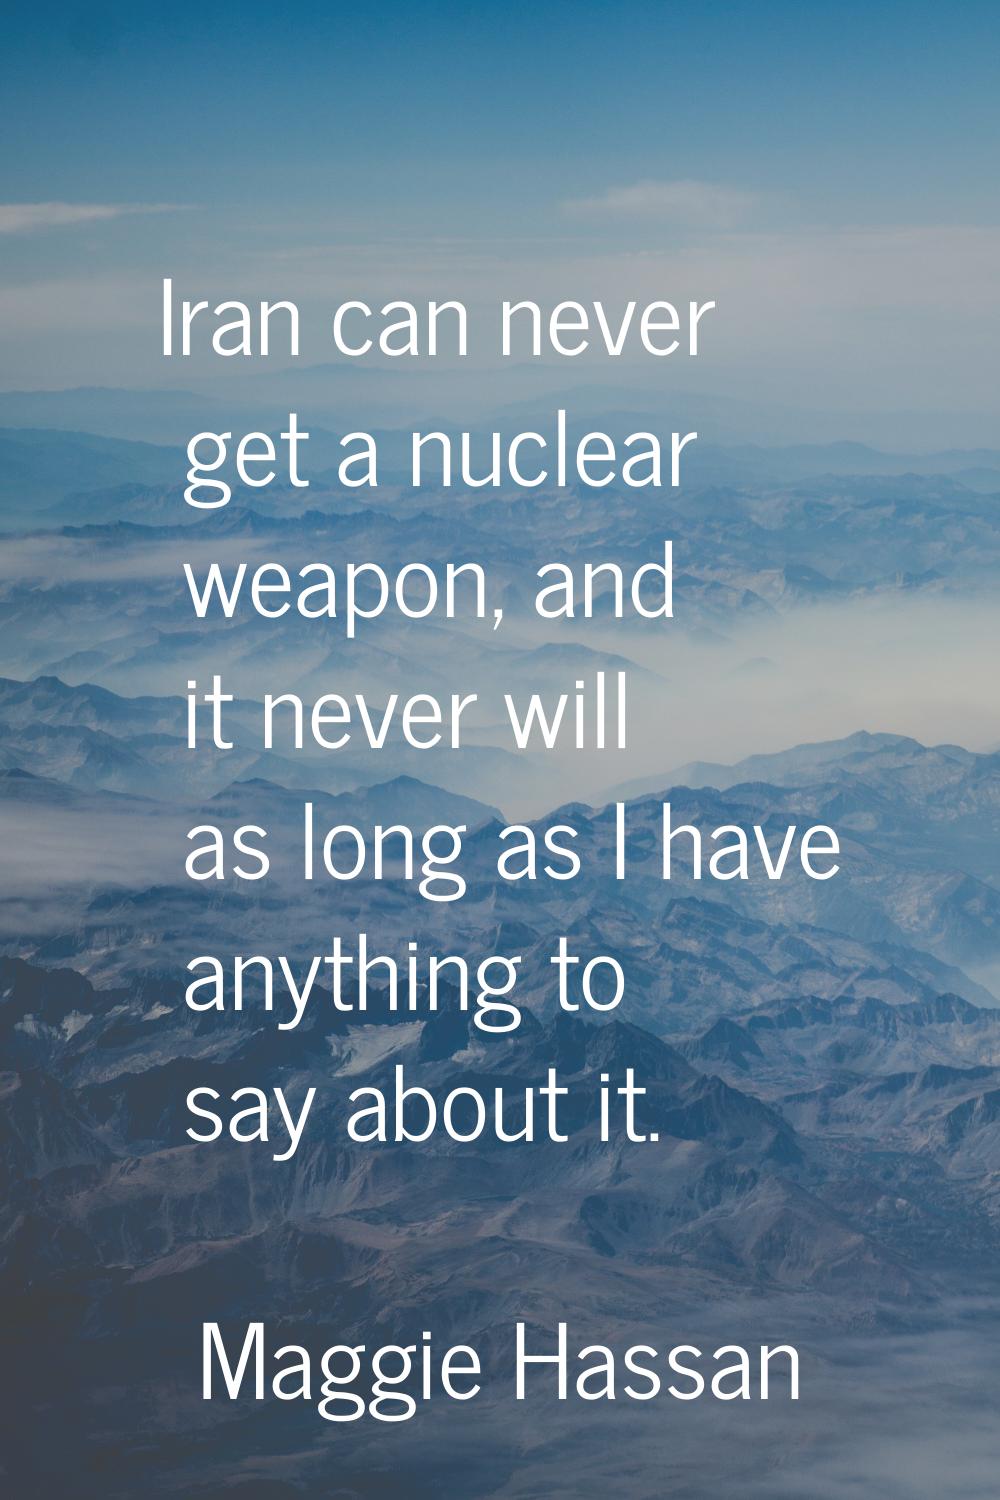 Iran can never get a nuclear weapon, and it never will as long as I have anything to say about it.